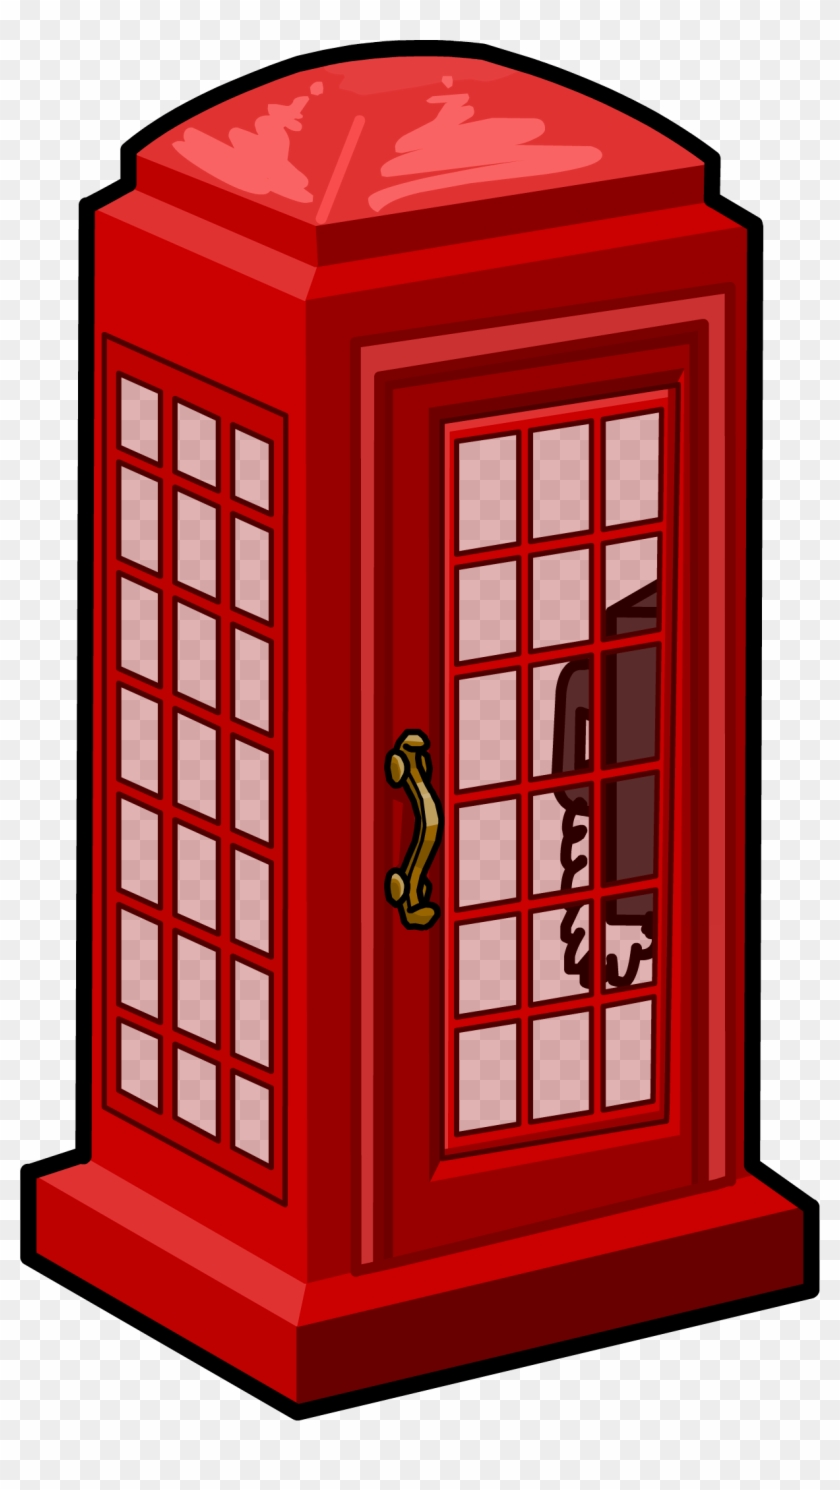 Telephone Booth Png - Club Penguin Phone Booth #169103